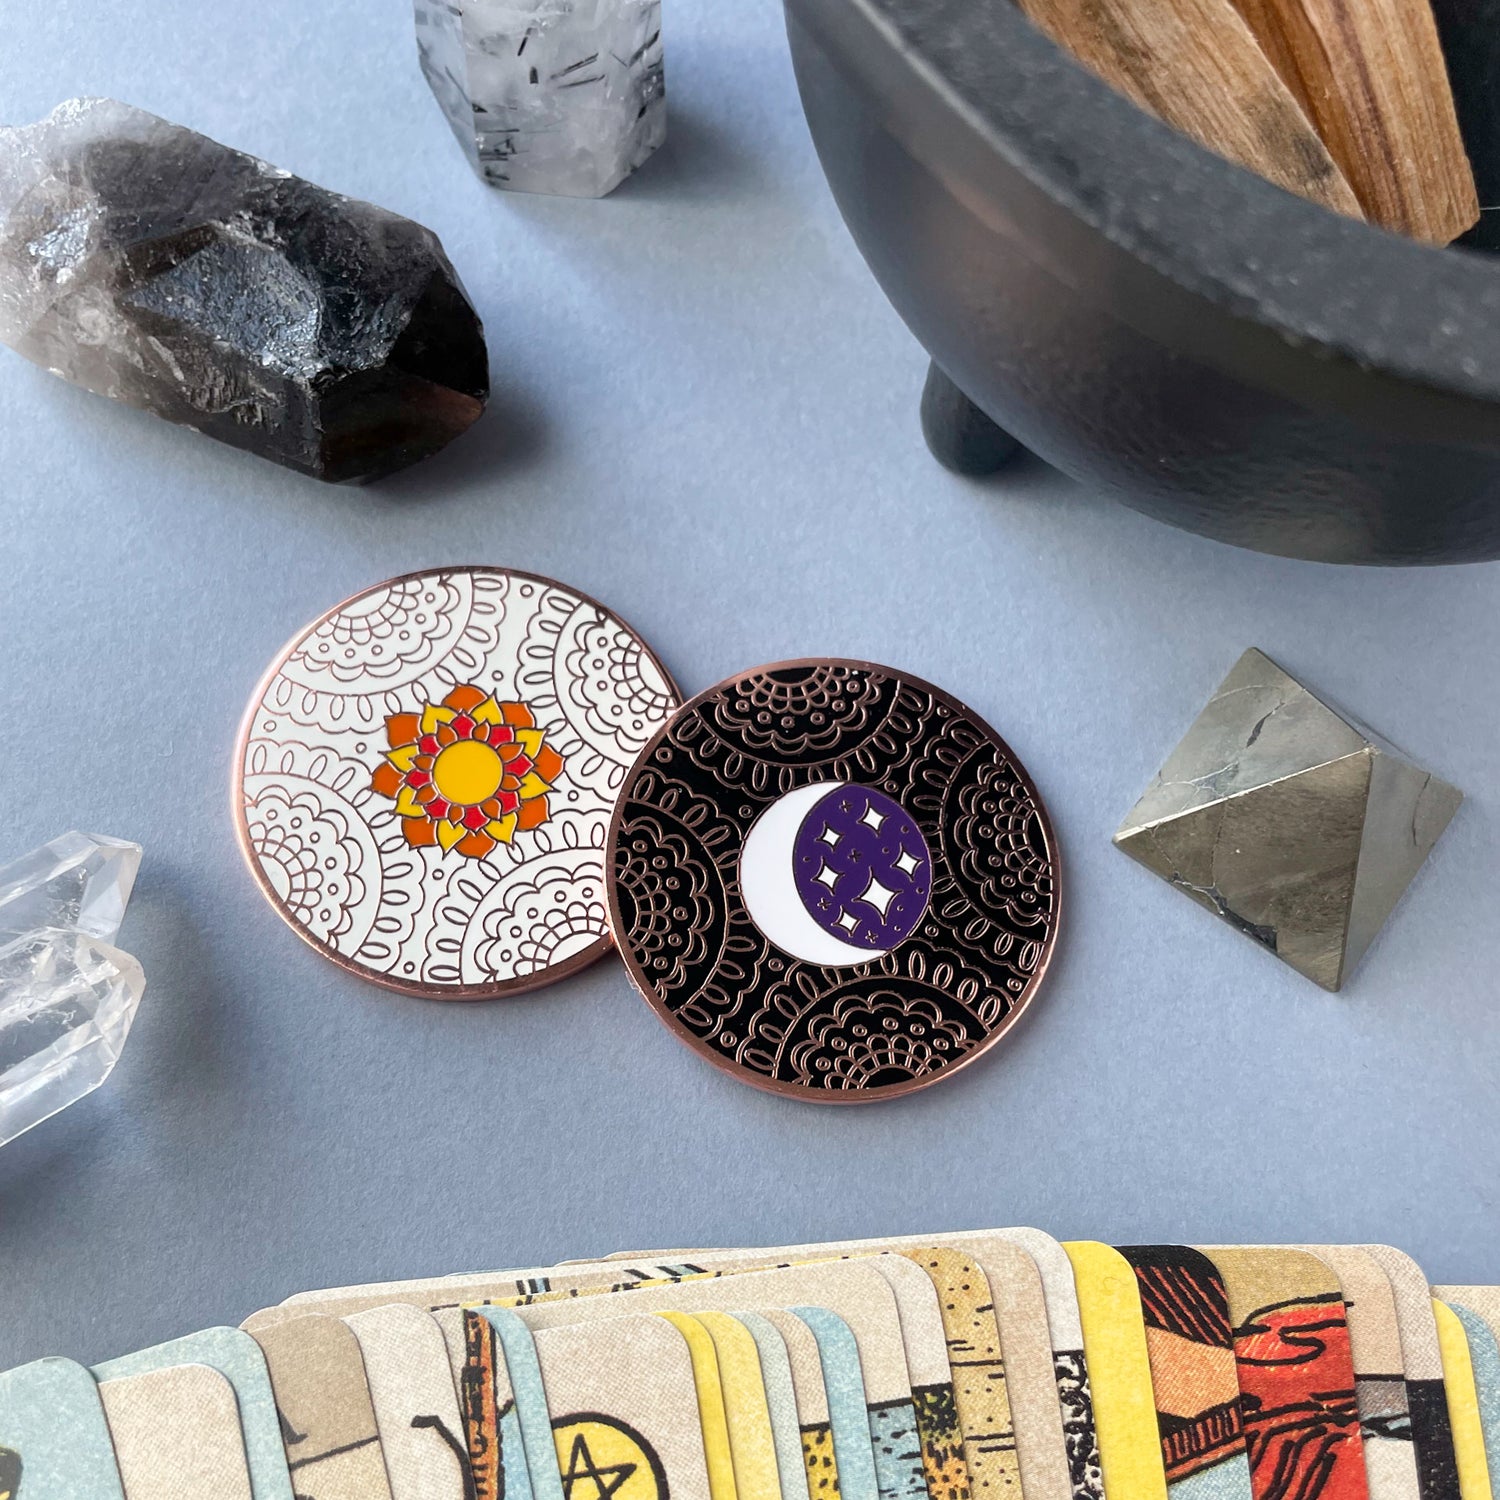 A coin with a sun on a white lace background resting on a coin with a moon and stars on a black lace background. The coins are surrounded by crystals and tarot cards.